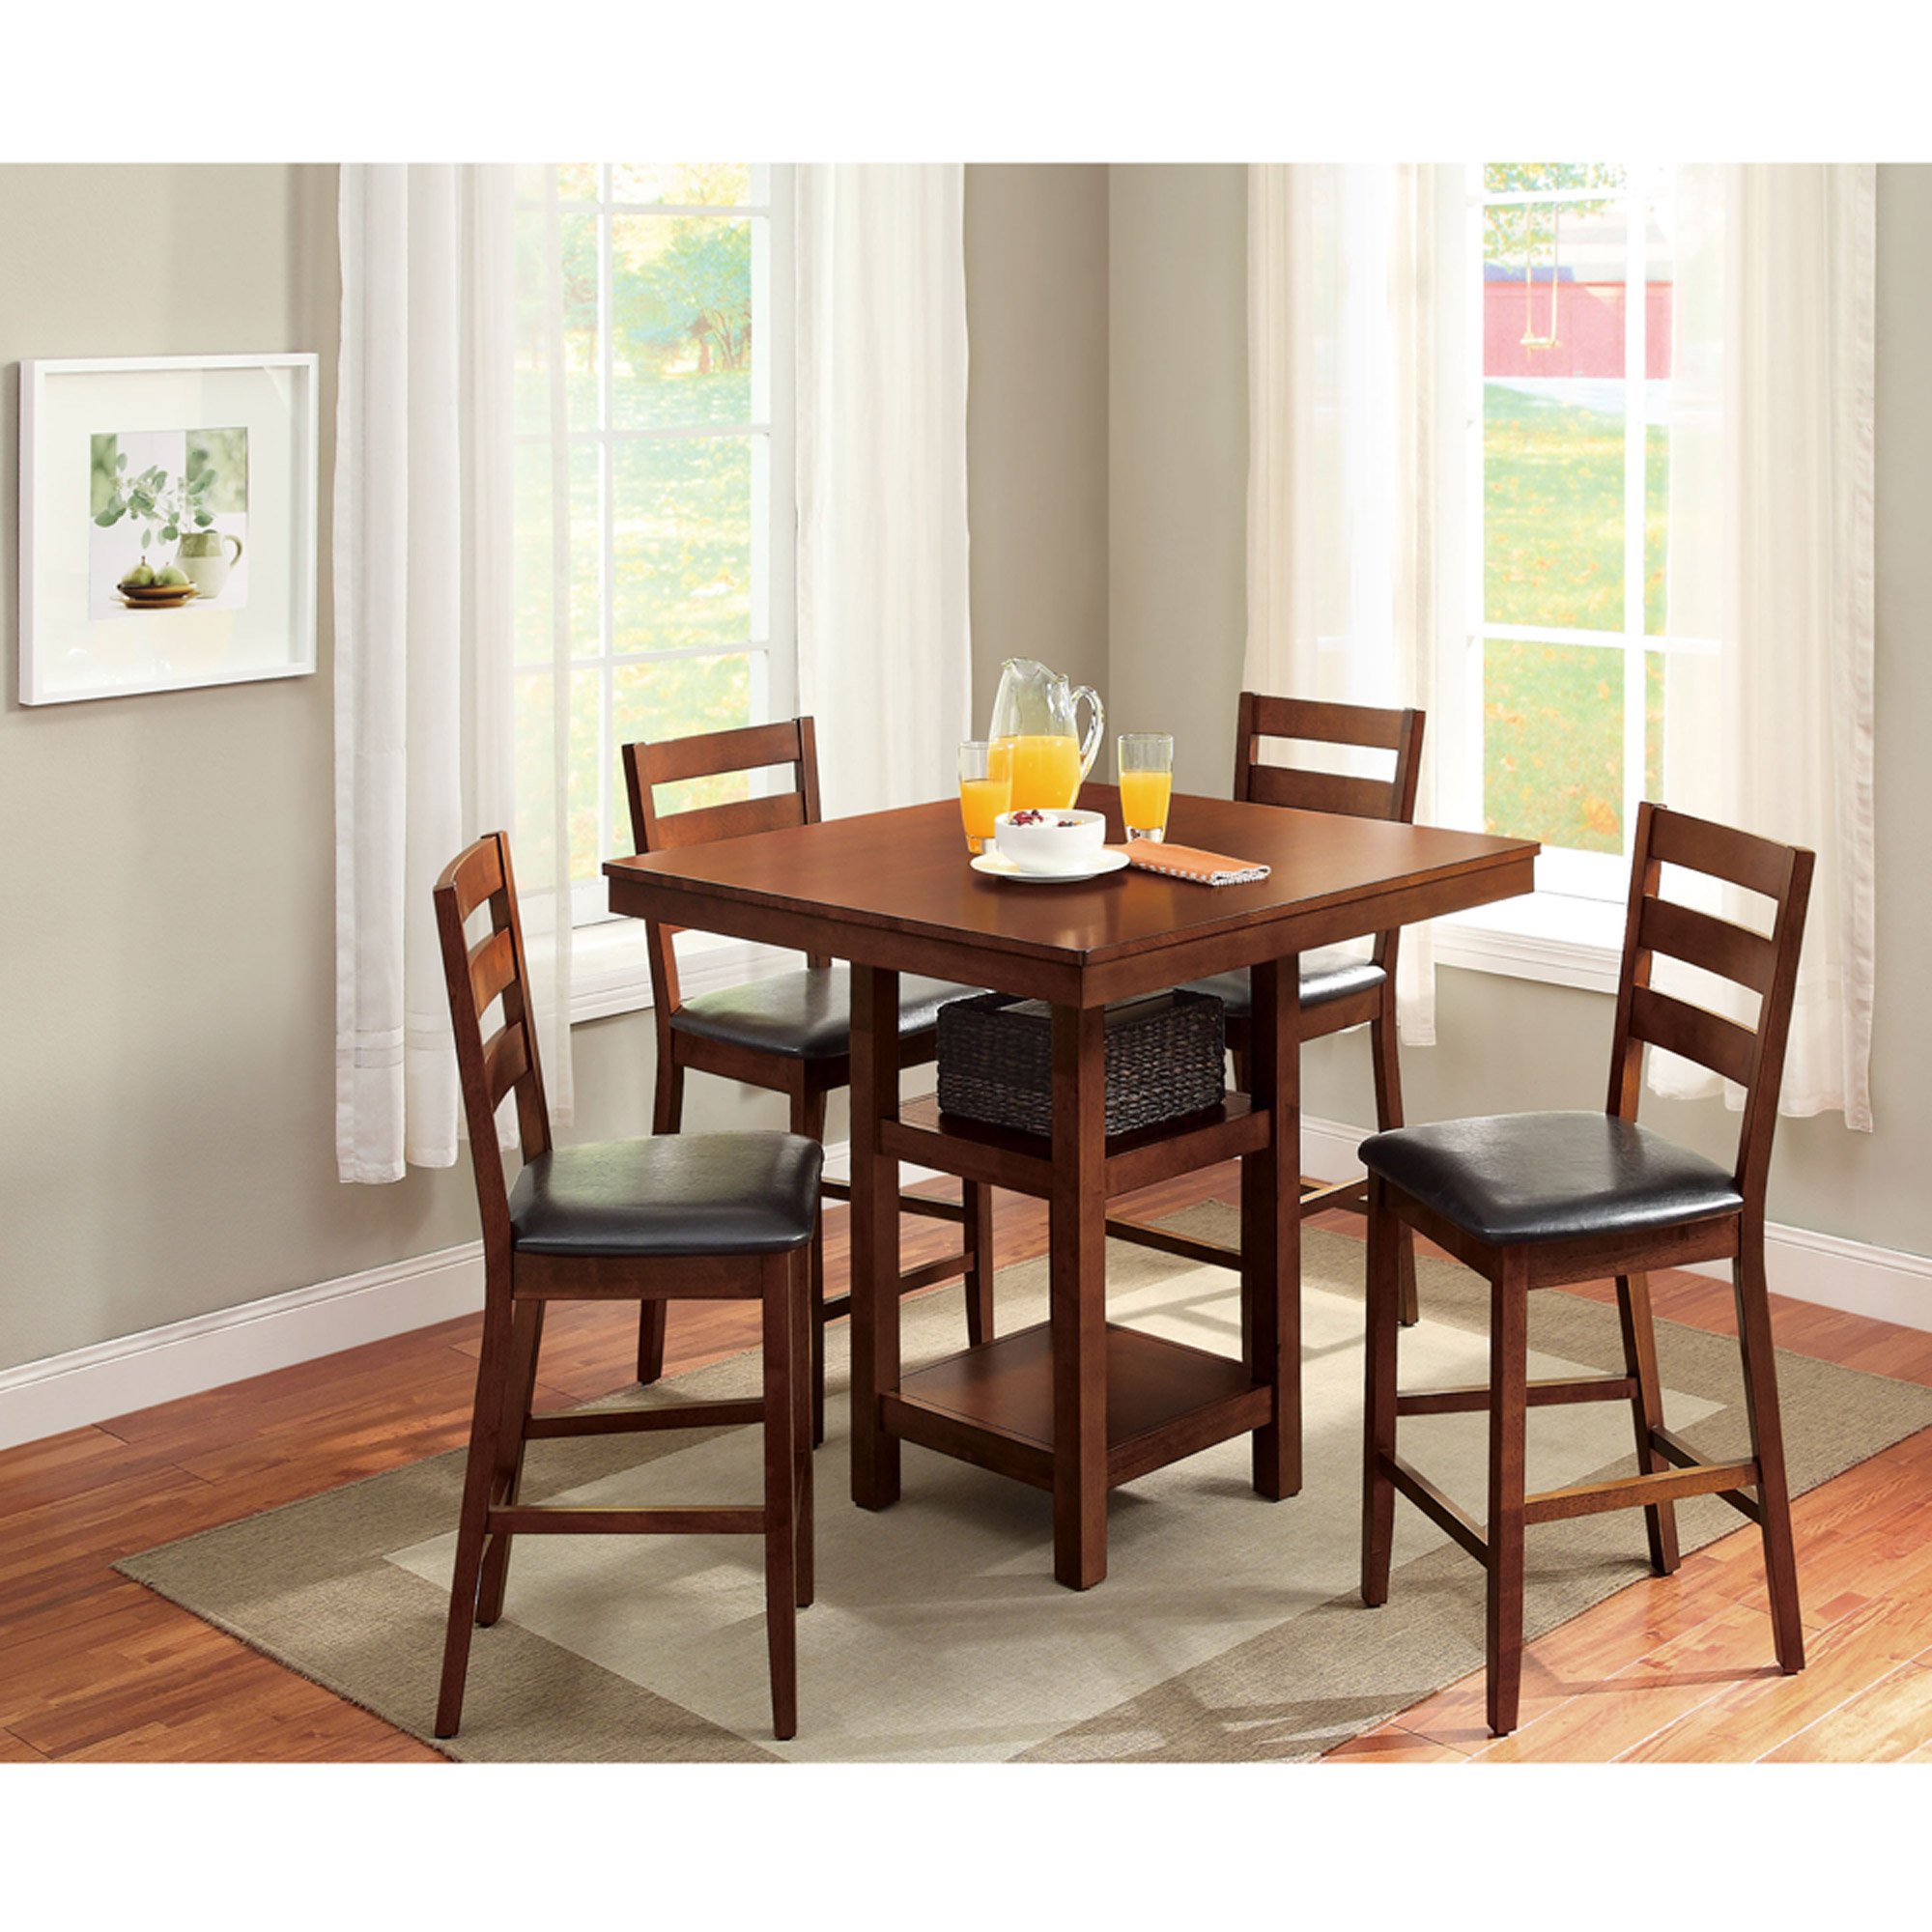 Awesome Kitchen u0026 Dining Furniture - Walmart.com dining room table and chairs